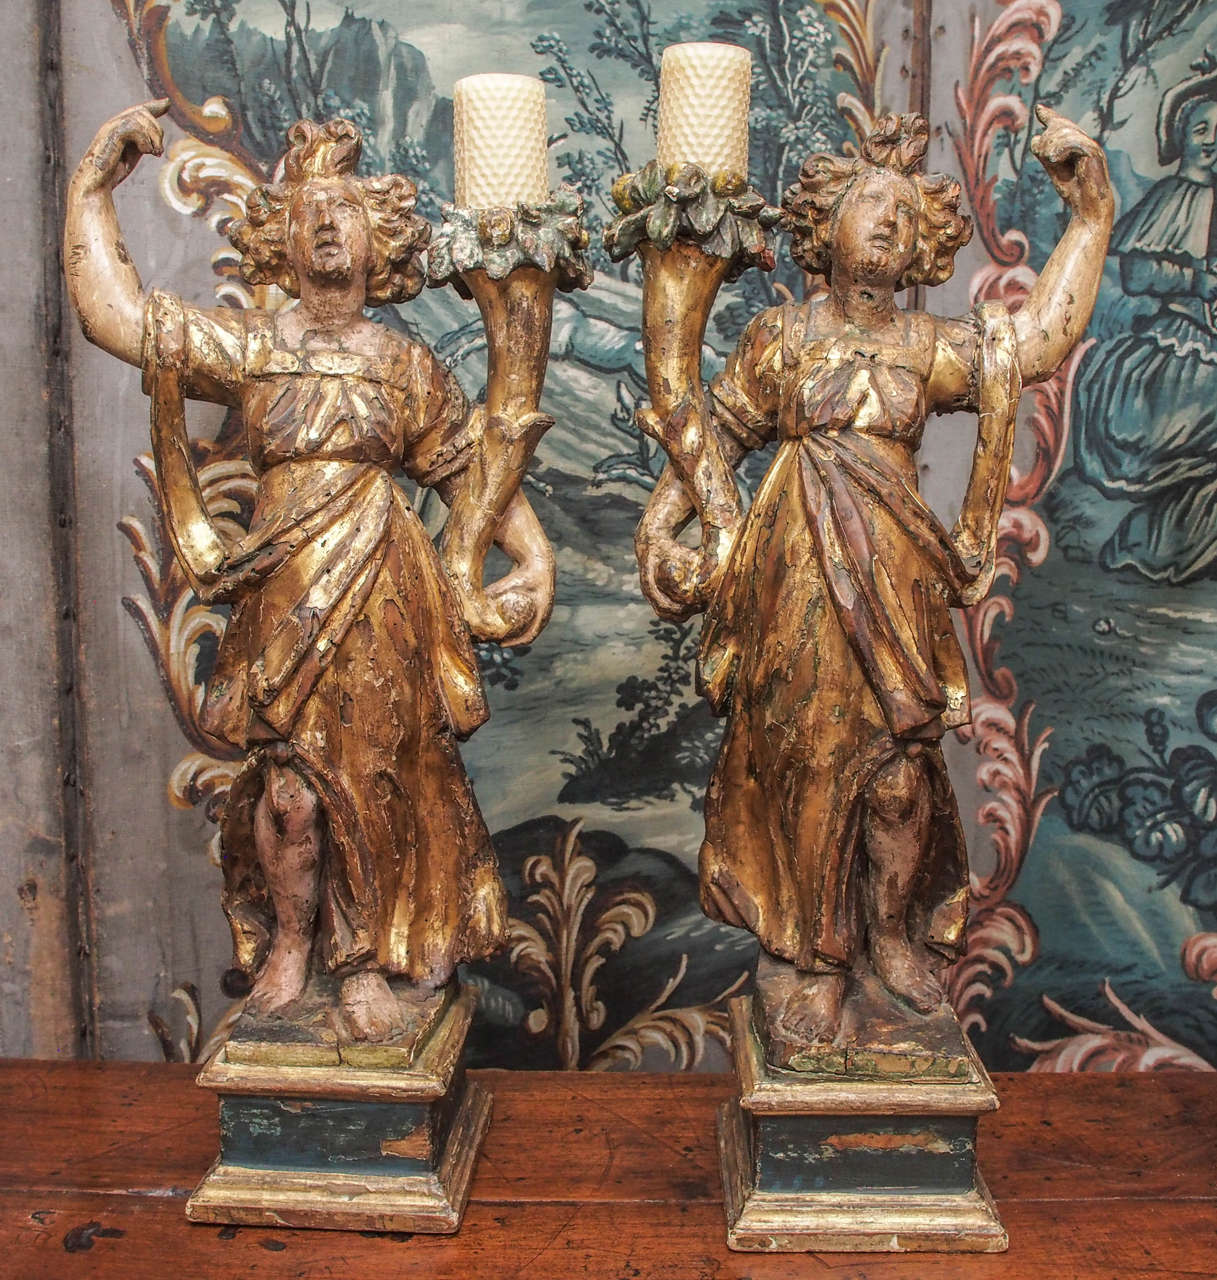 Pair of Italian giltwood maidens in classical dress with cornucopia now holding candles.